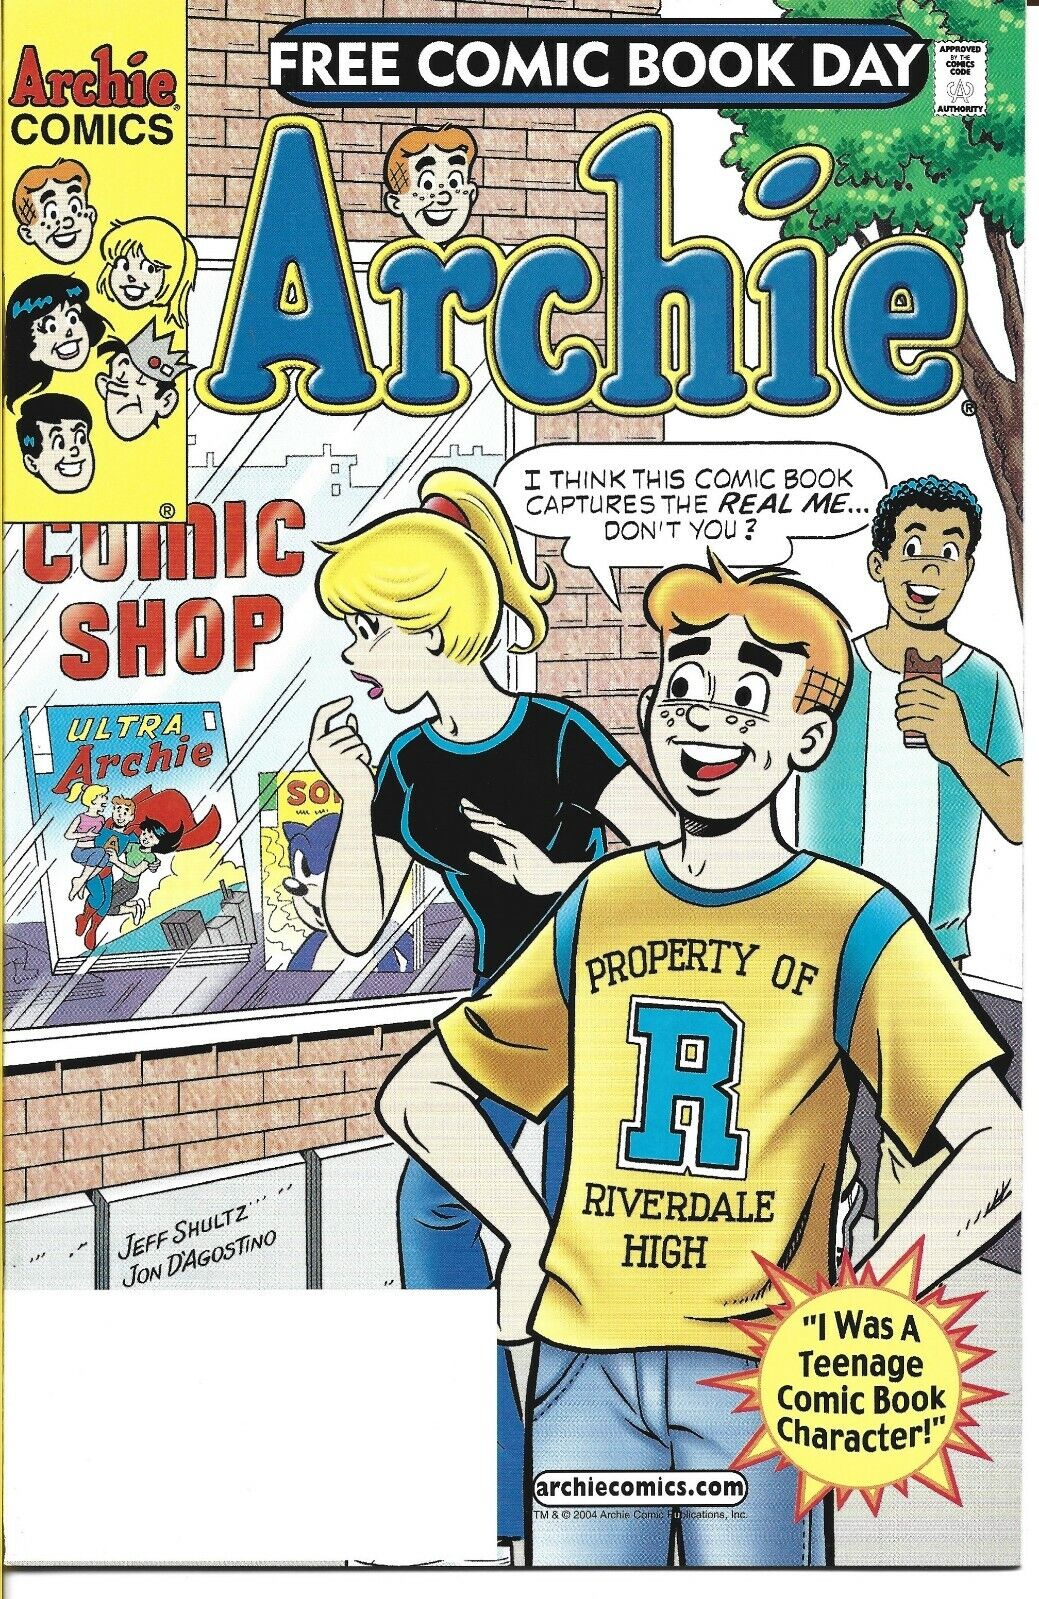 ARCHIE FCBD #2 2003 ARCHIE PUBLICATIONS BAGGED AND BOARDED 